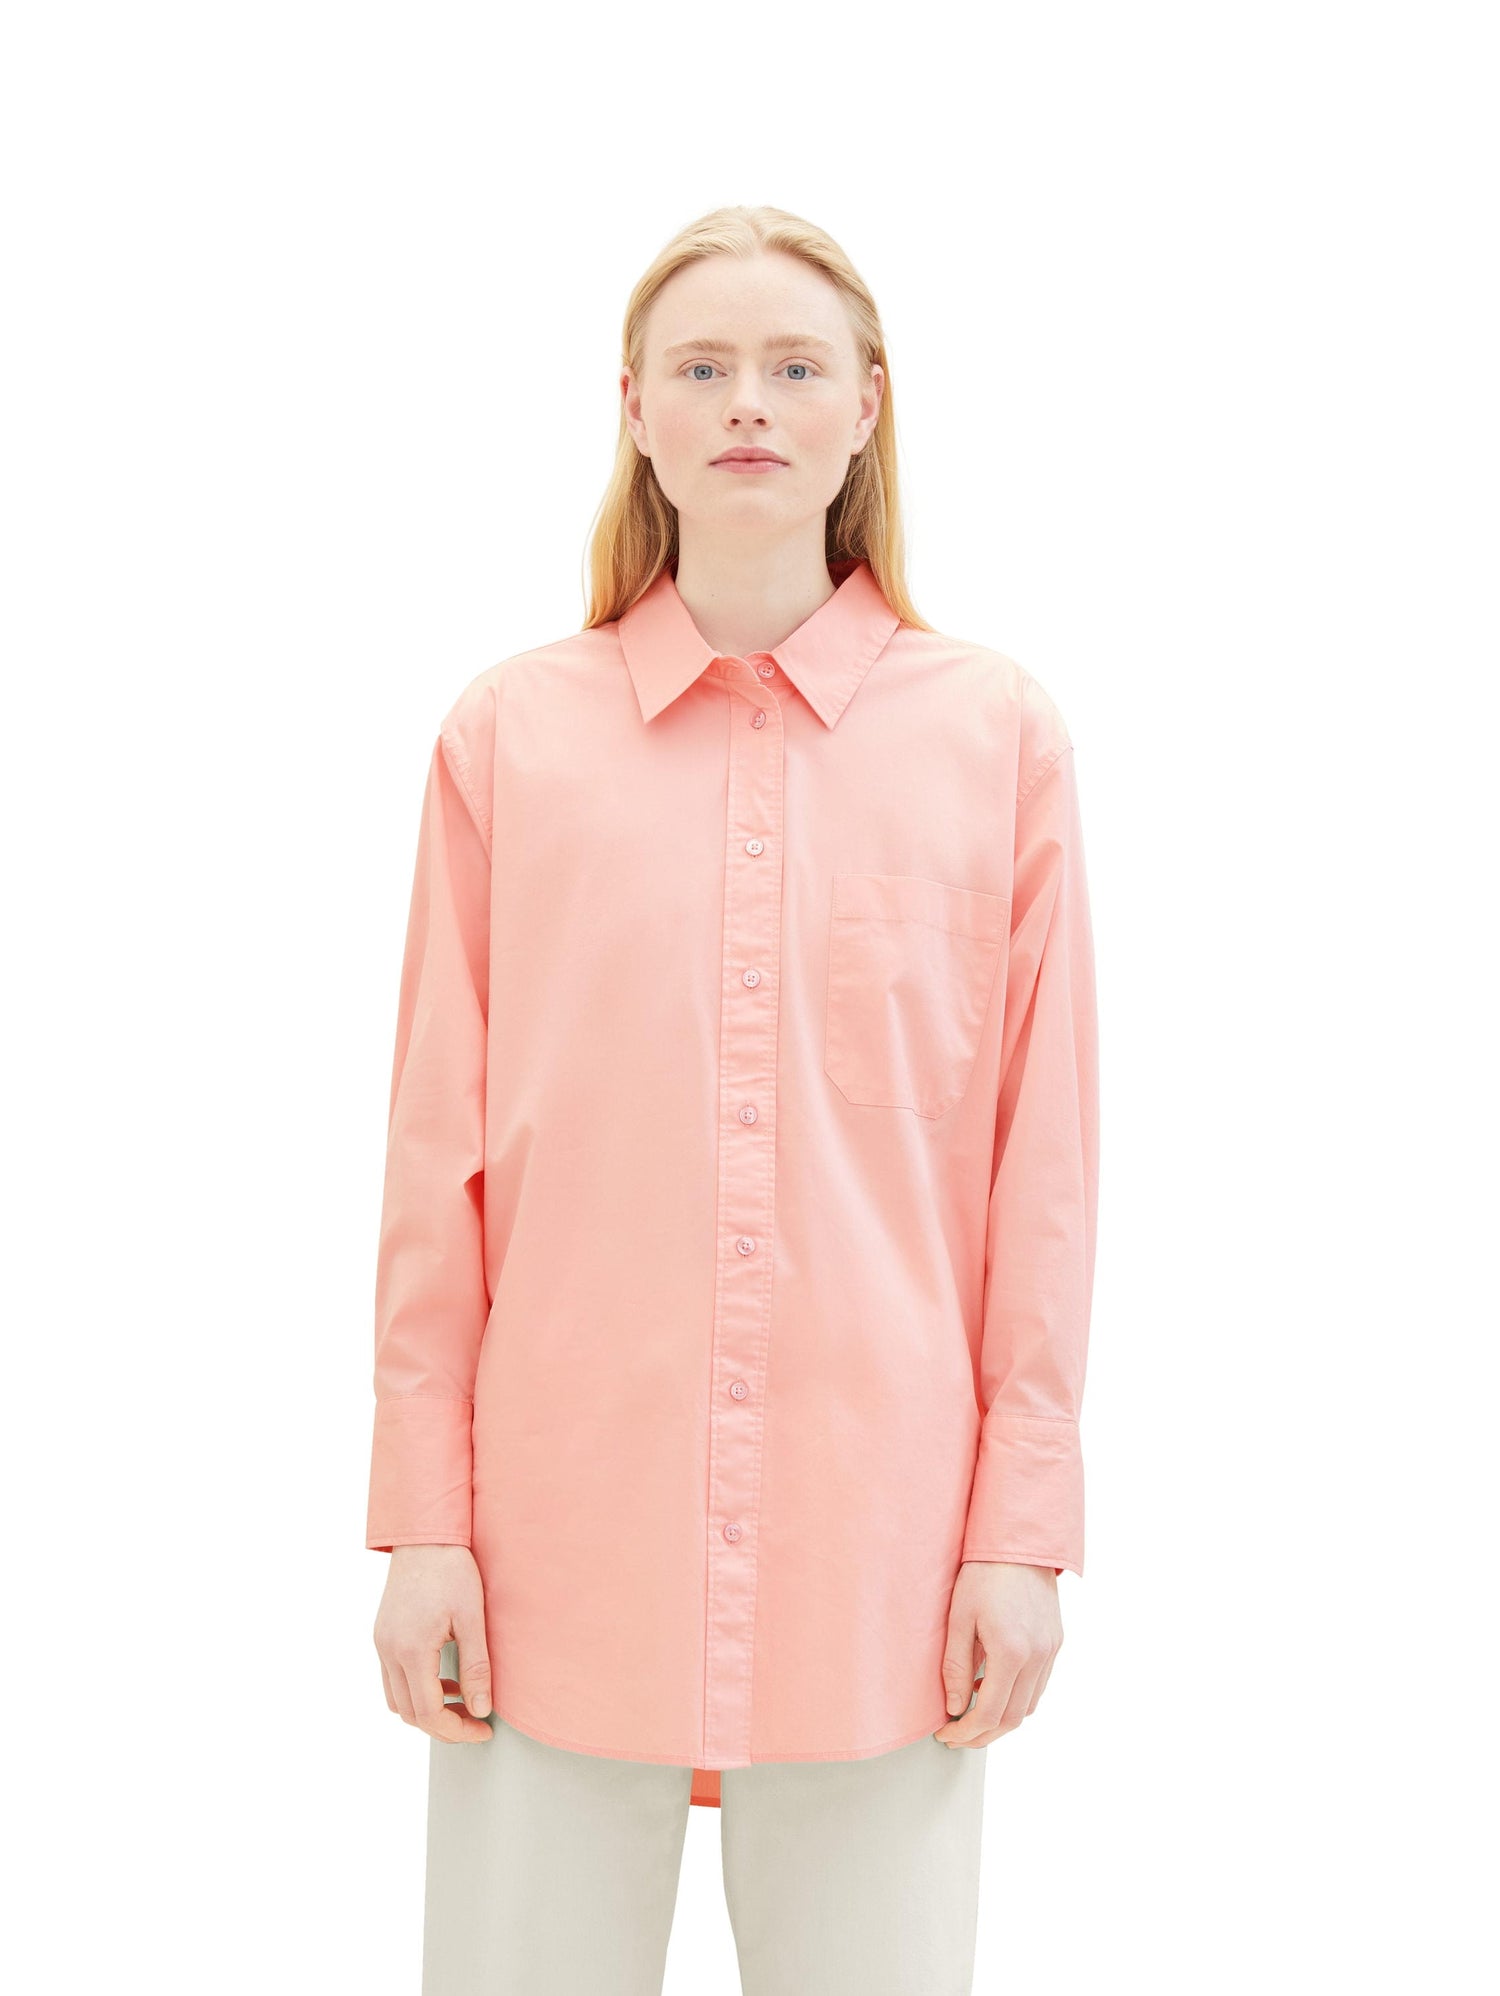 Long Shirt With Chest Pocket_1032792_21171_06